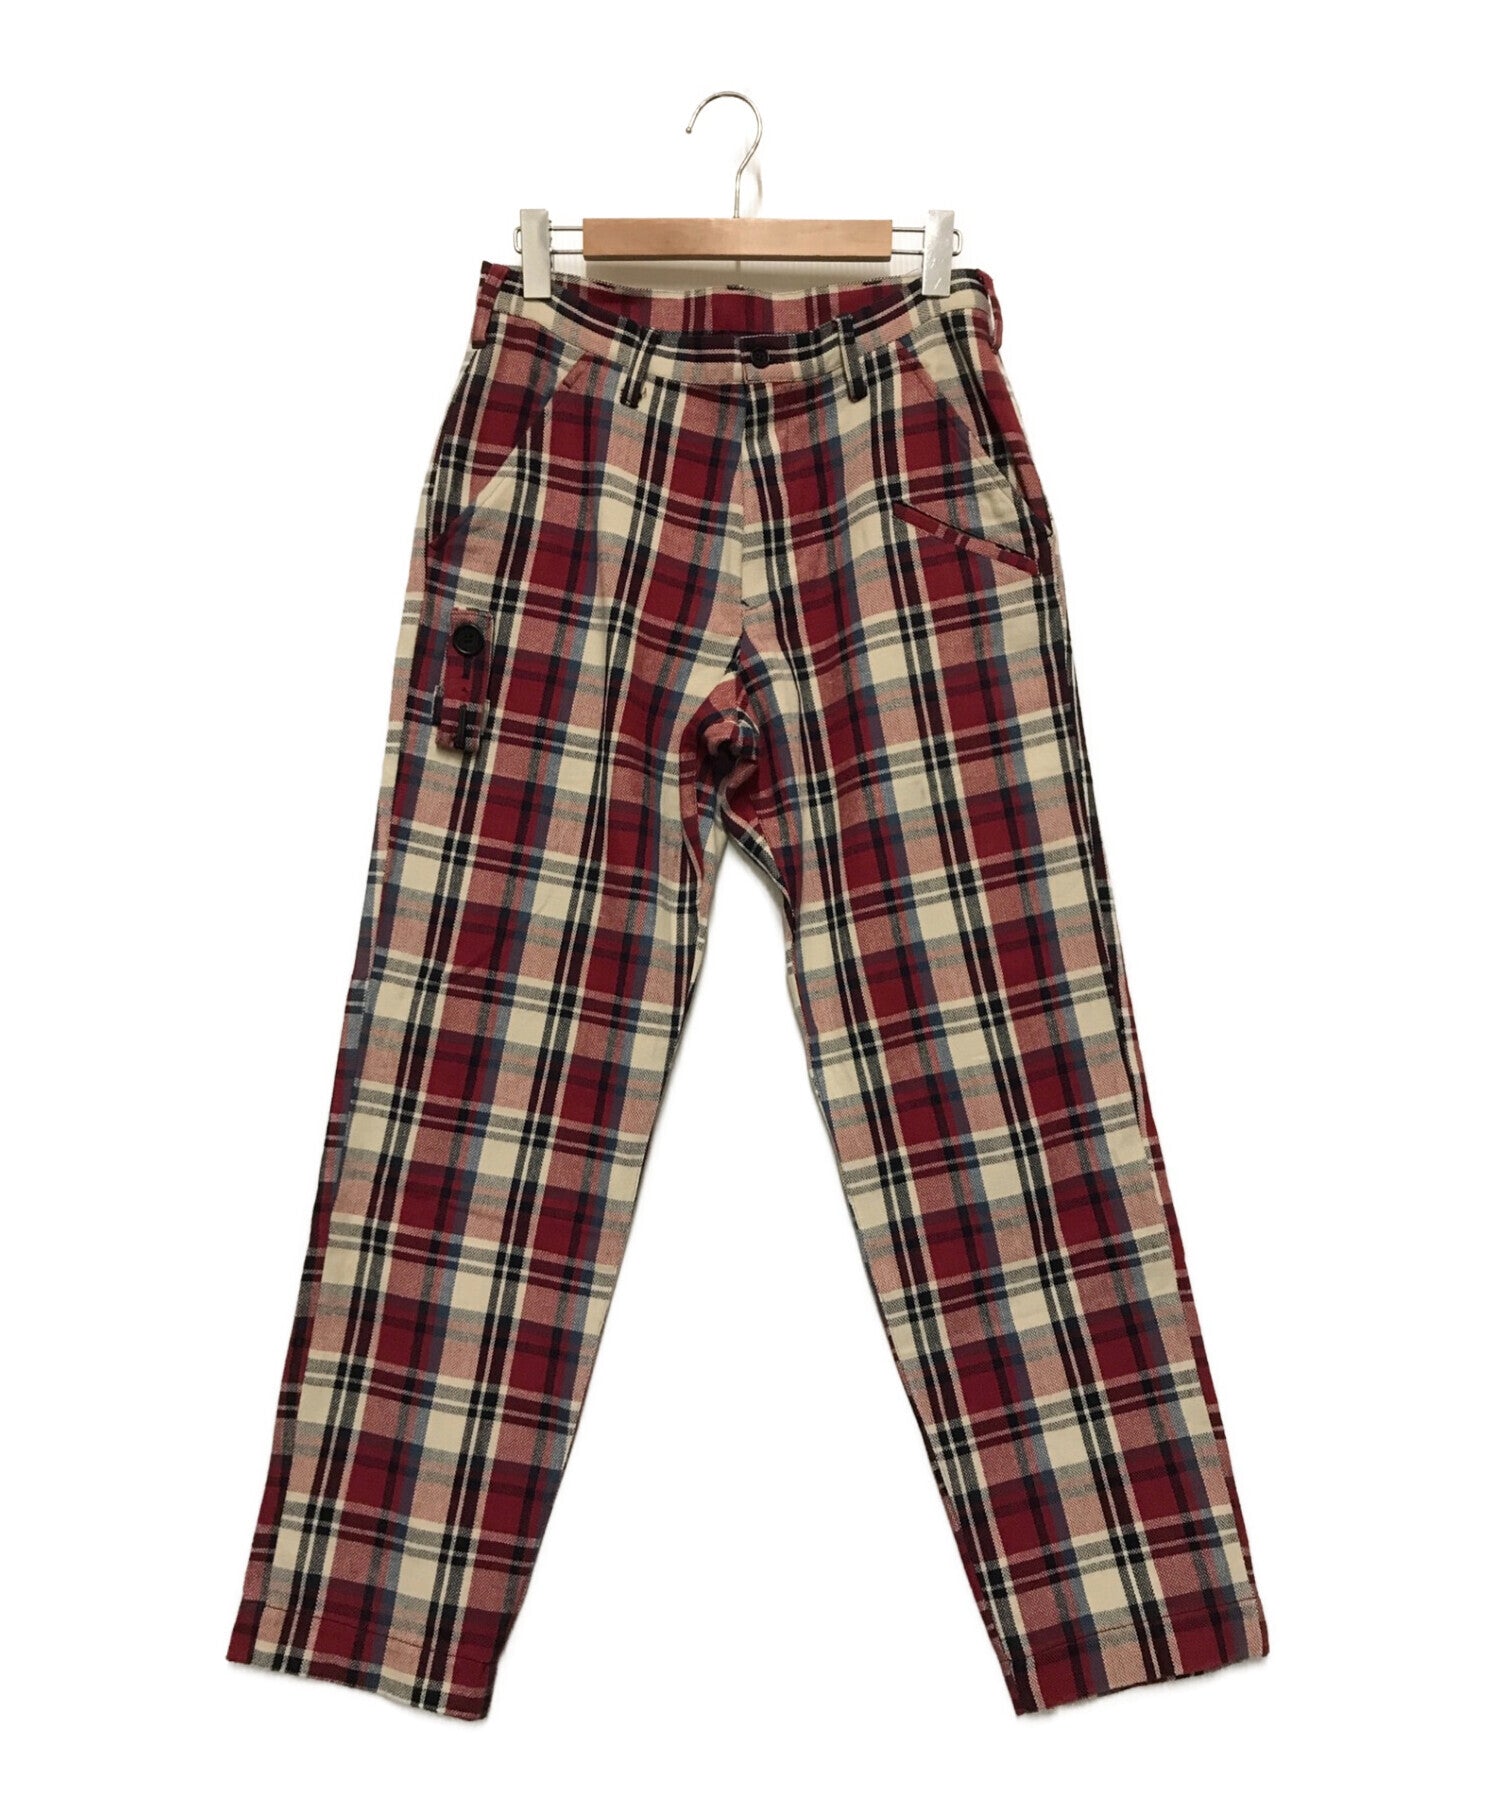 Full Length Pants in Check Patterned Tricot